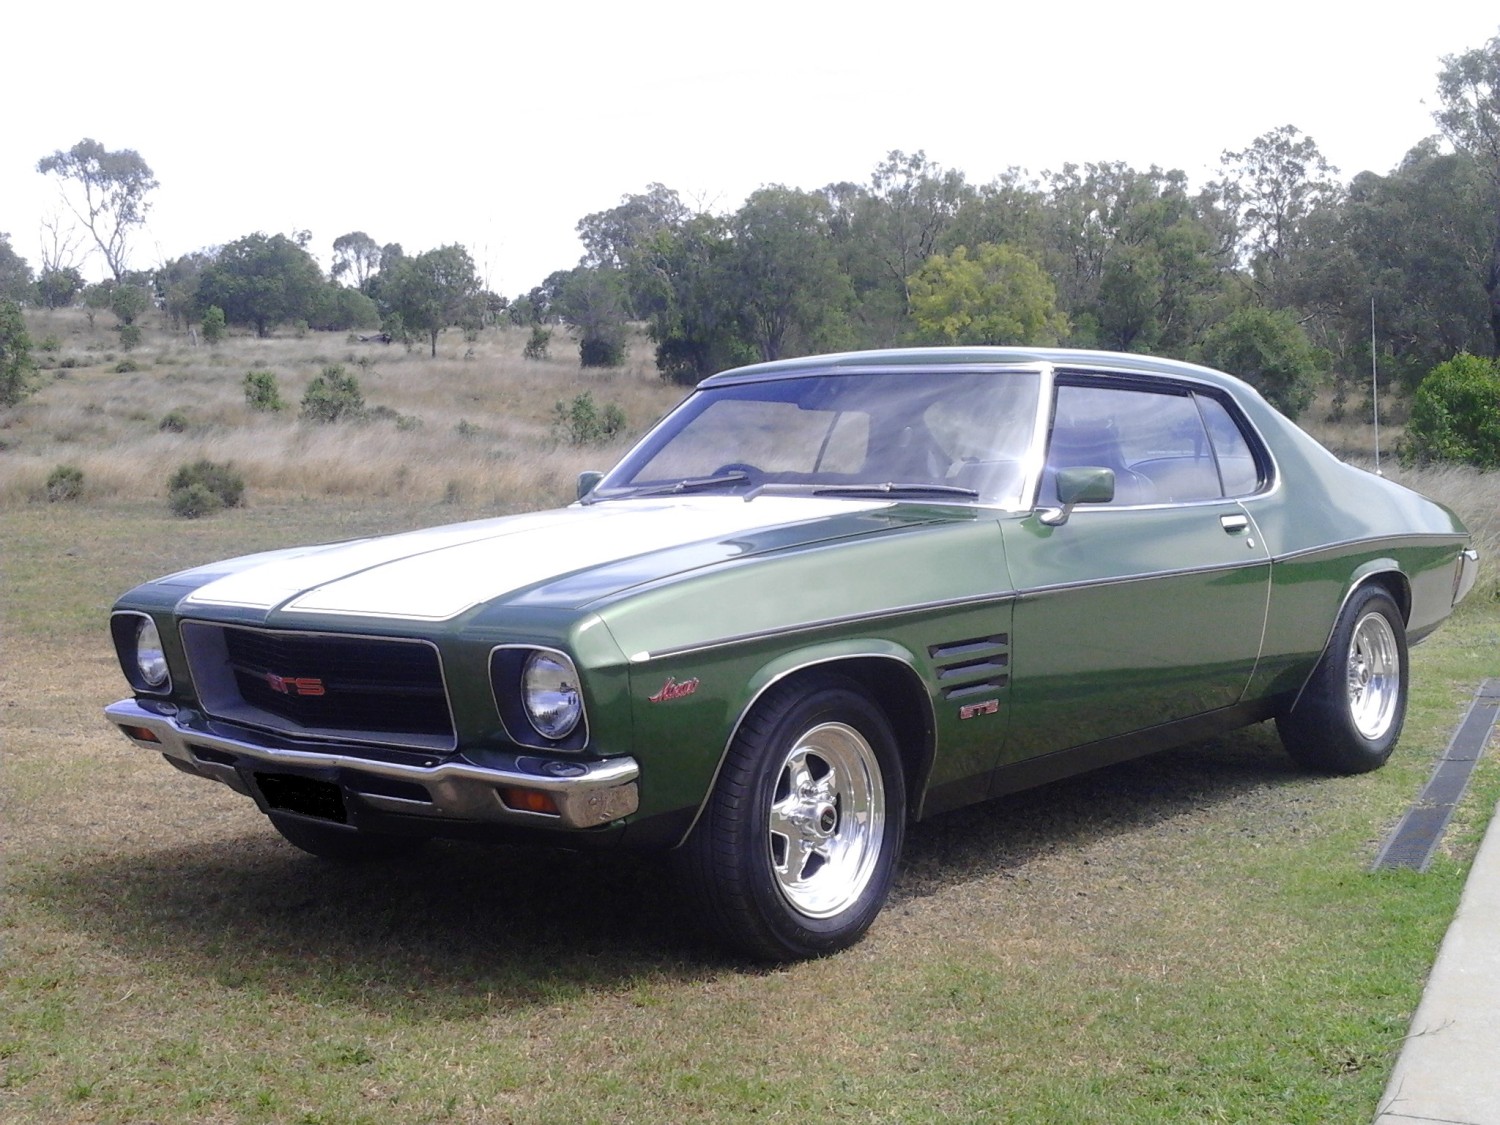 1974 Holden HQ GTS Monaro coupe 308 four speed